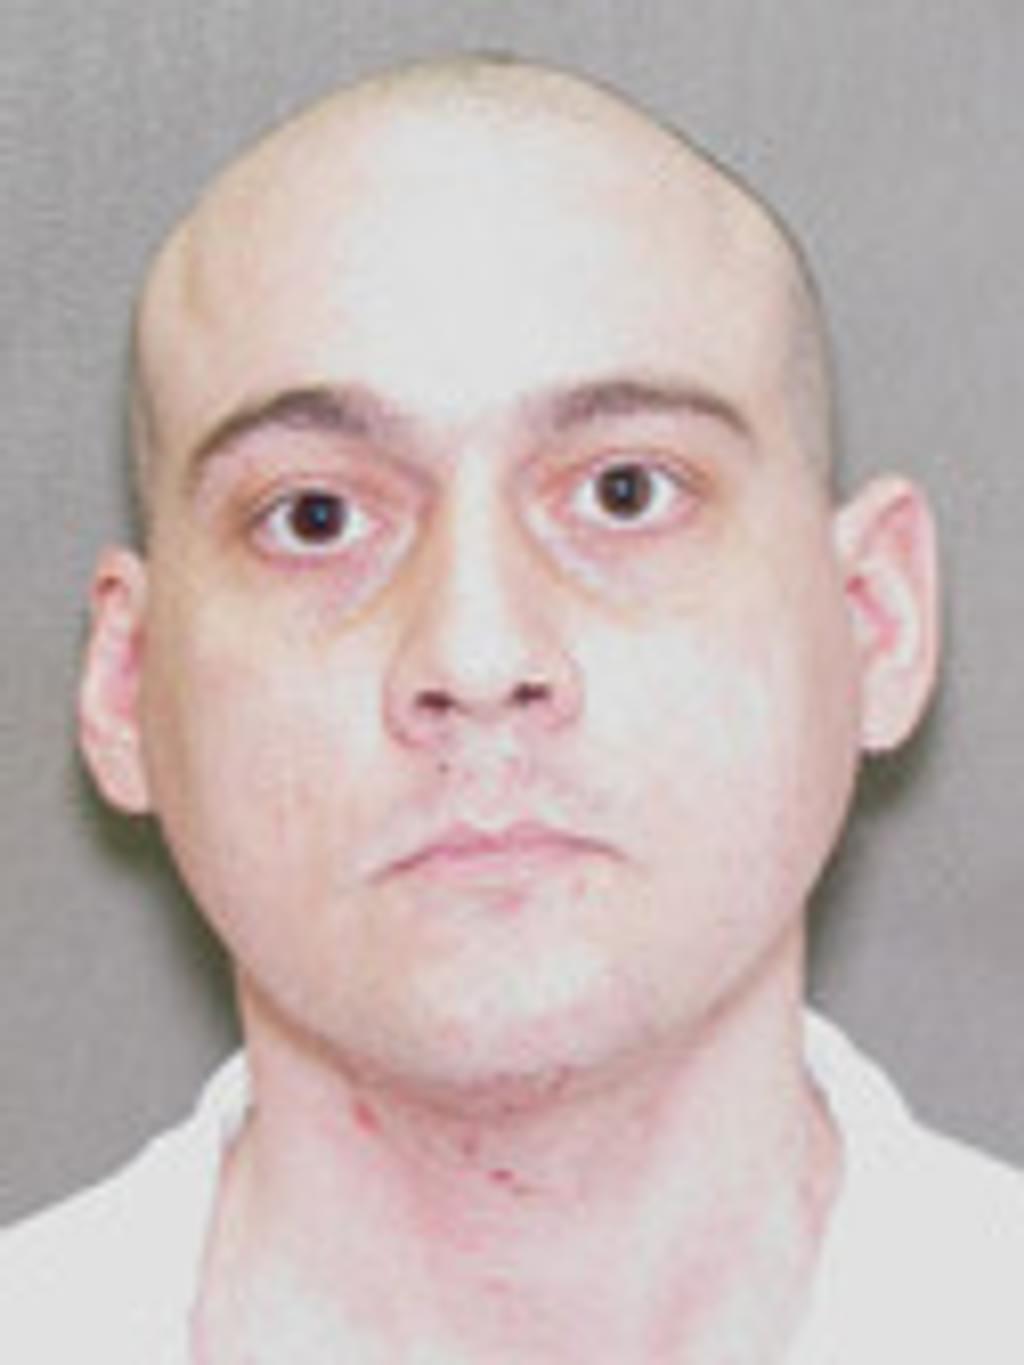 Texas Court Issues 60-Day Stay of Execution for John Hummel in Response to Coronavirus Crisis